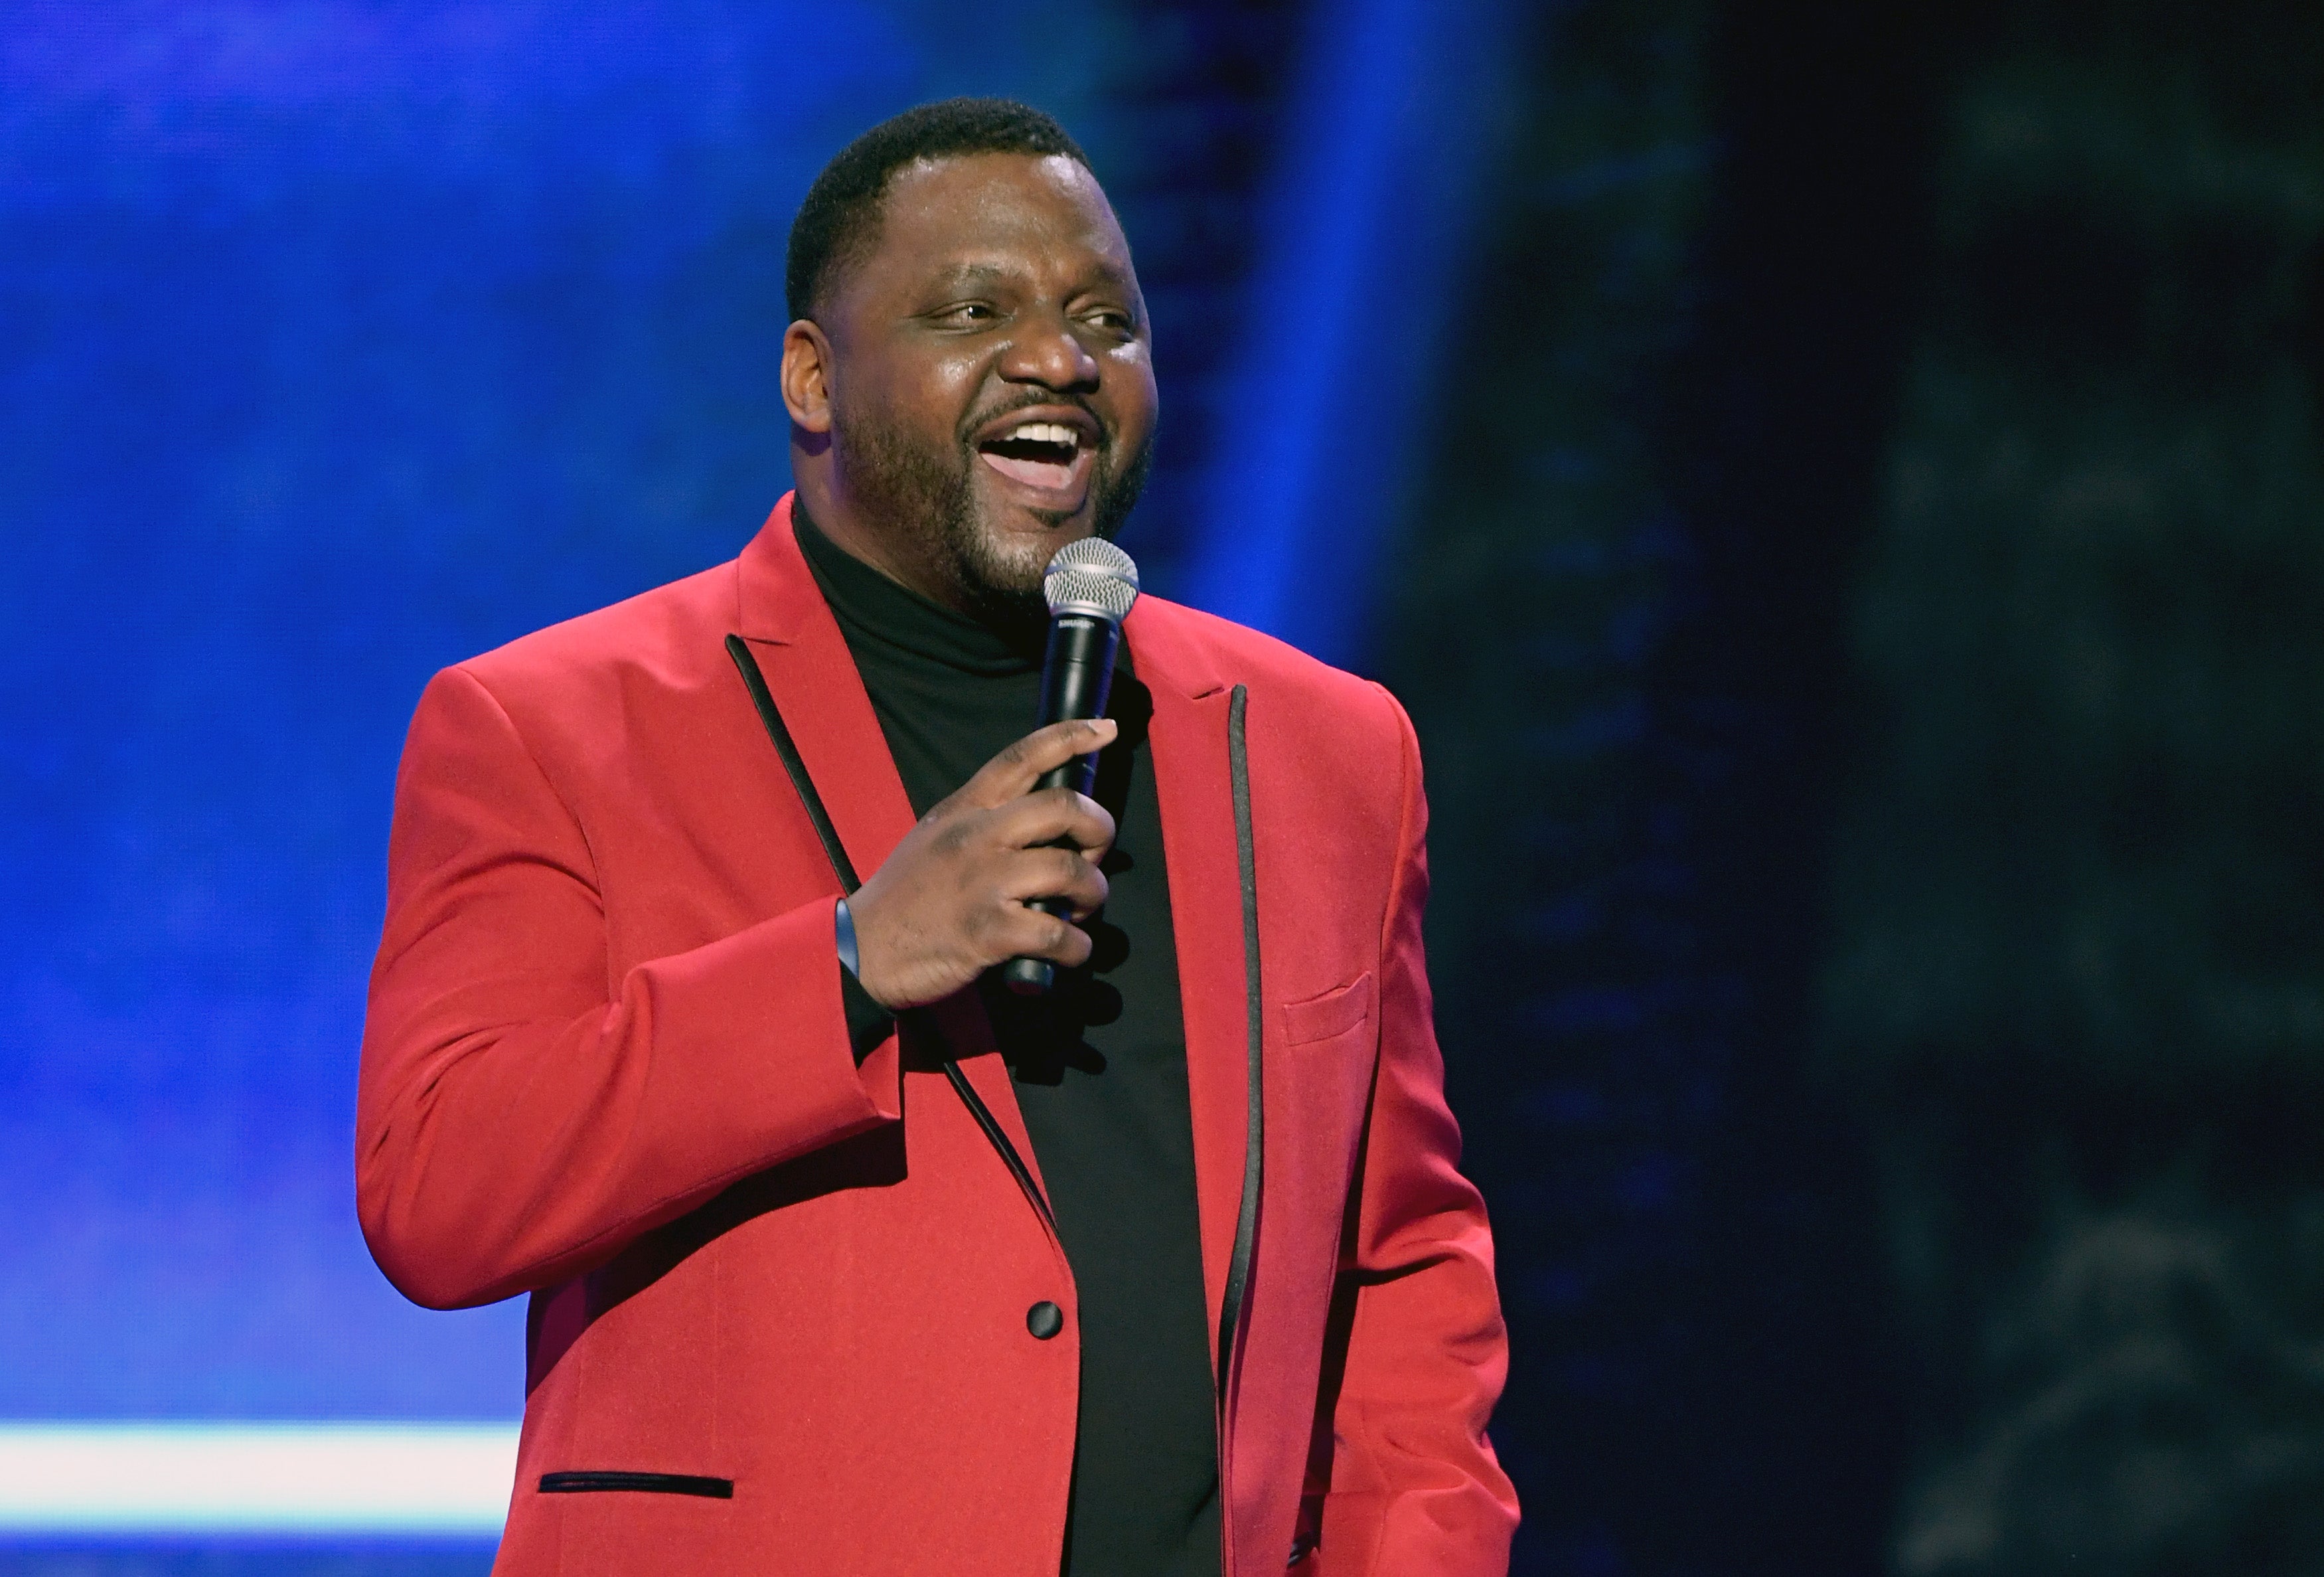 Aries Spears was also cleared following the lawsuit’s dismissal